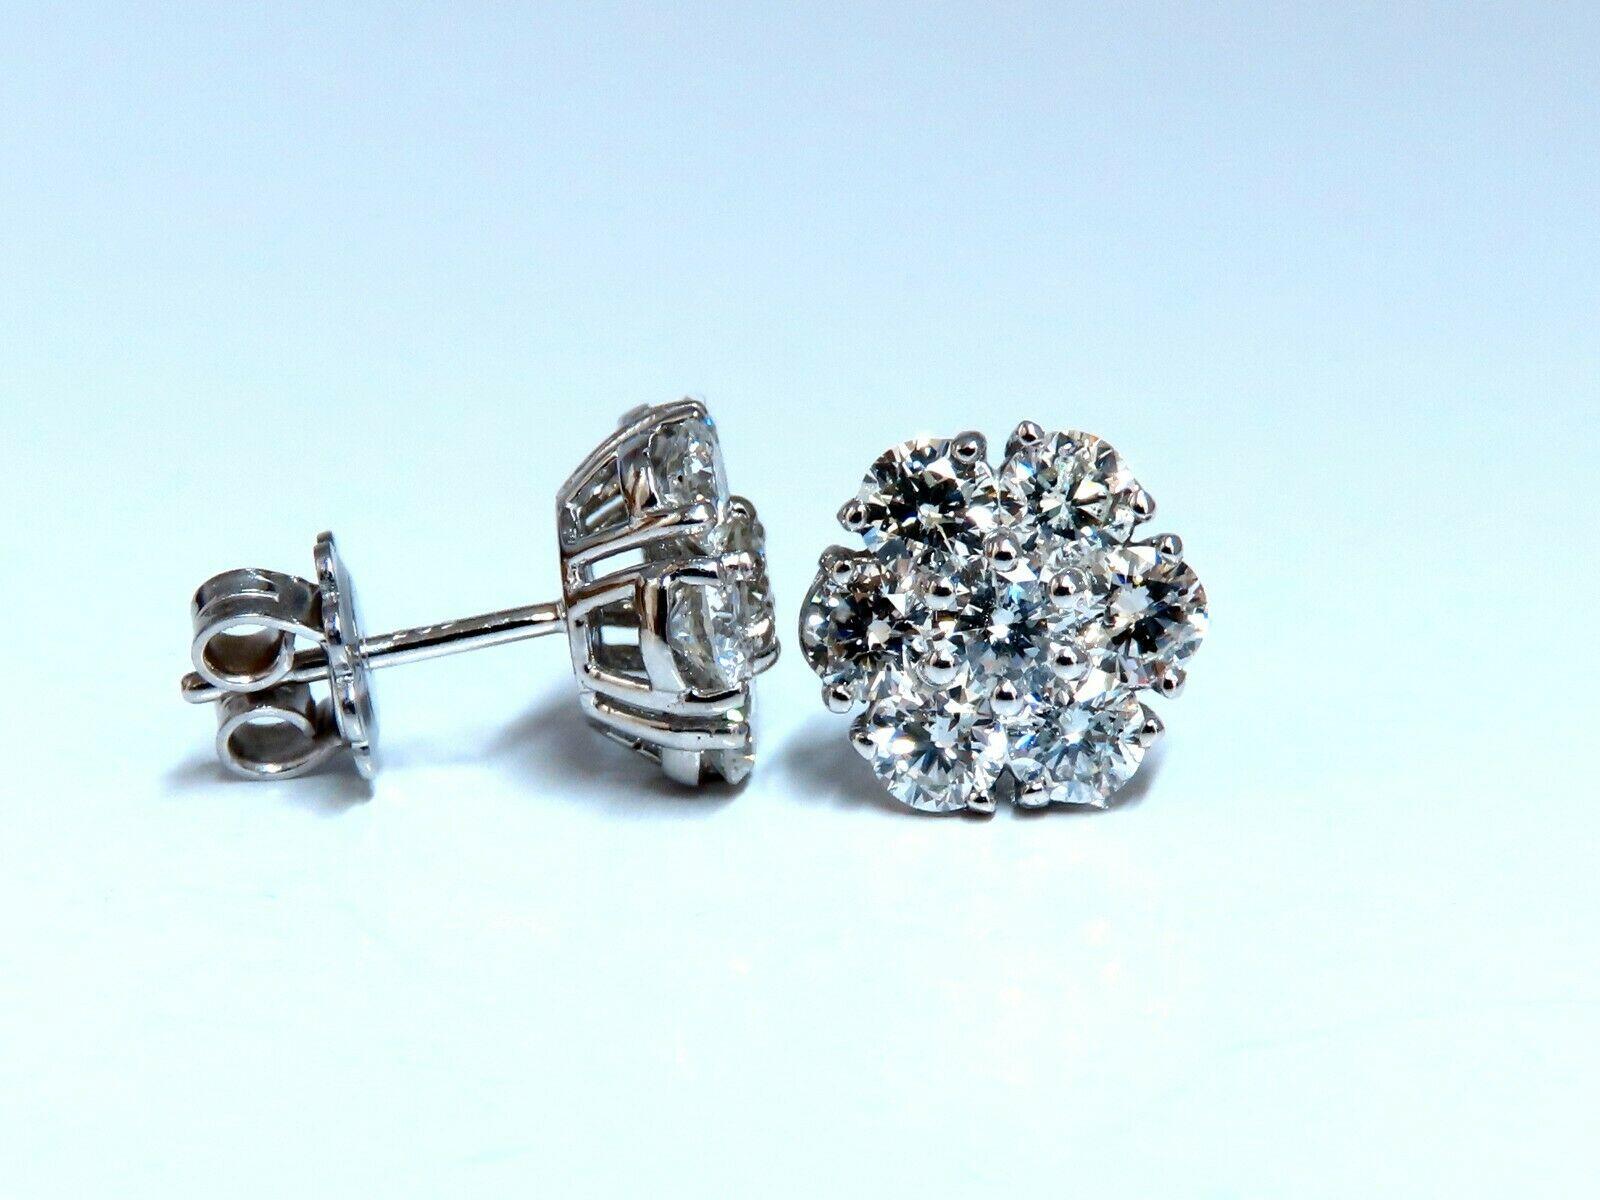 Cluster & Halo Stud Earrings.

2.96cts of natural round diamonds: 

G-color, Vs-2 Si-1 clarity.

14kt. white gold

3.8 grams.

Earrings measure: 11mm Diameter

Comfortable Butterfly

$14,000 Appraisal Certificate to accompany